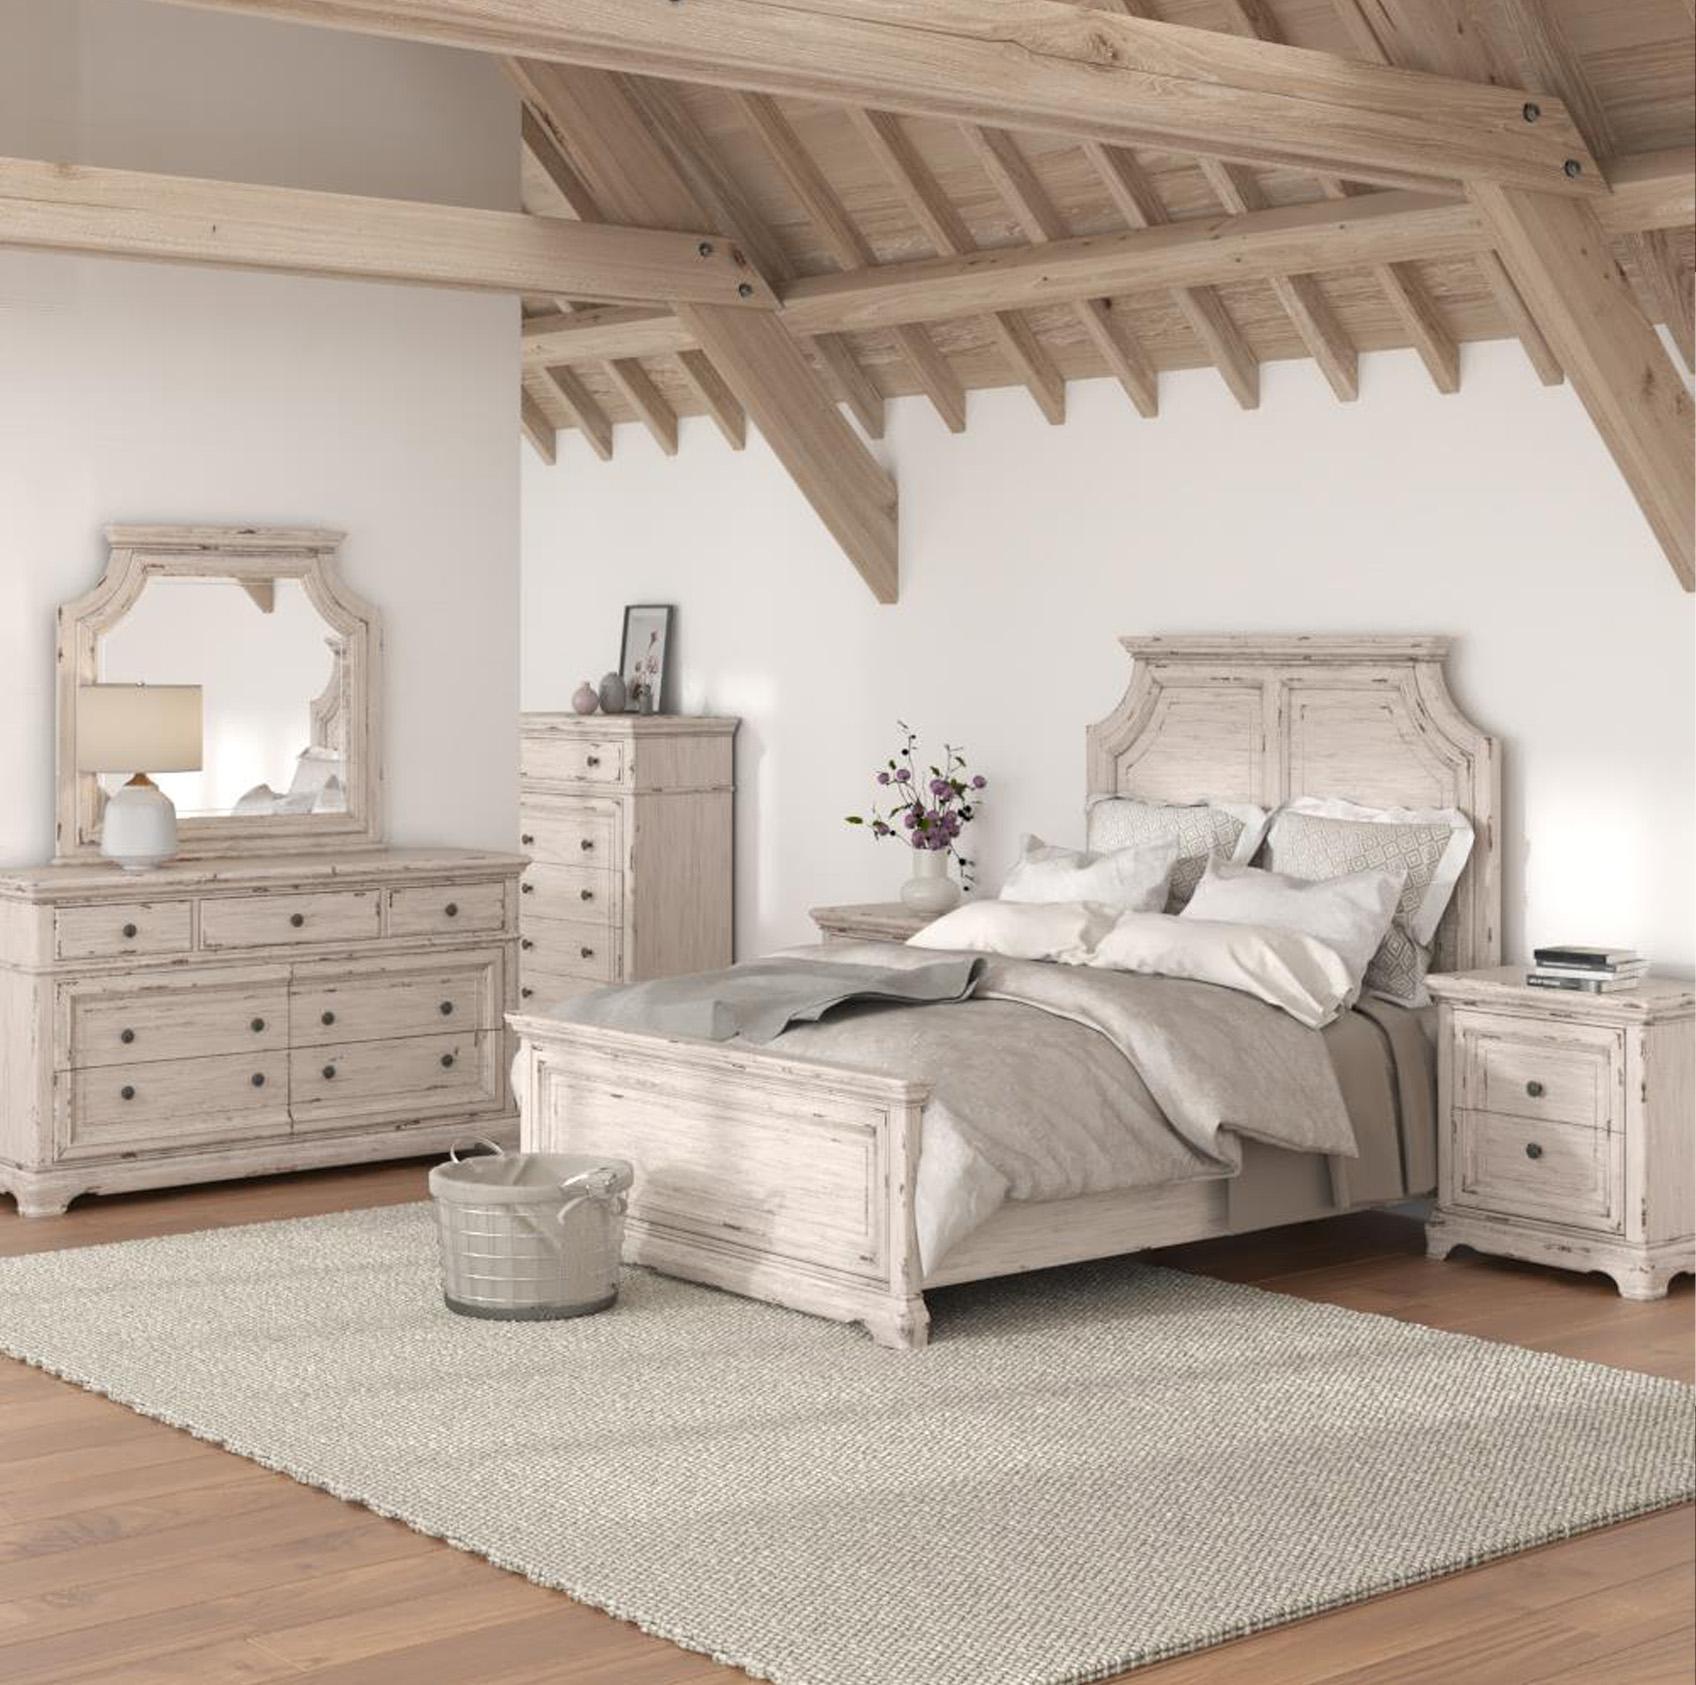 

    
Antique White Queen Bedroom Set 5Pcs PROVIDENCE American Woodcrafters Rustic
